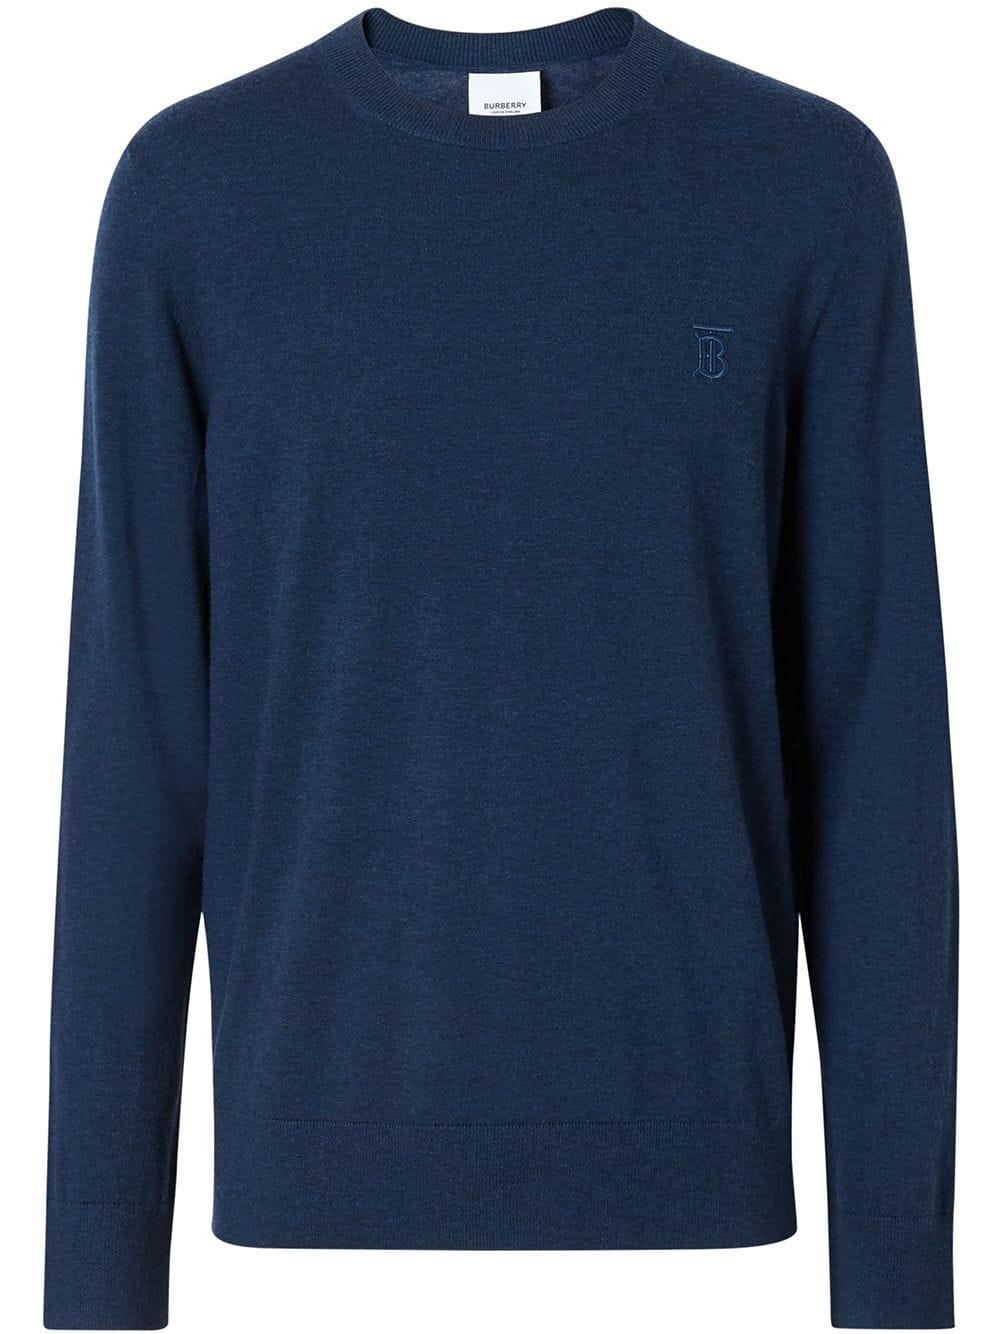 Burberry Monogram Motif Cashmere Sweater in Blue for Men - Save 29% - Lyst